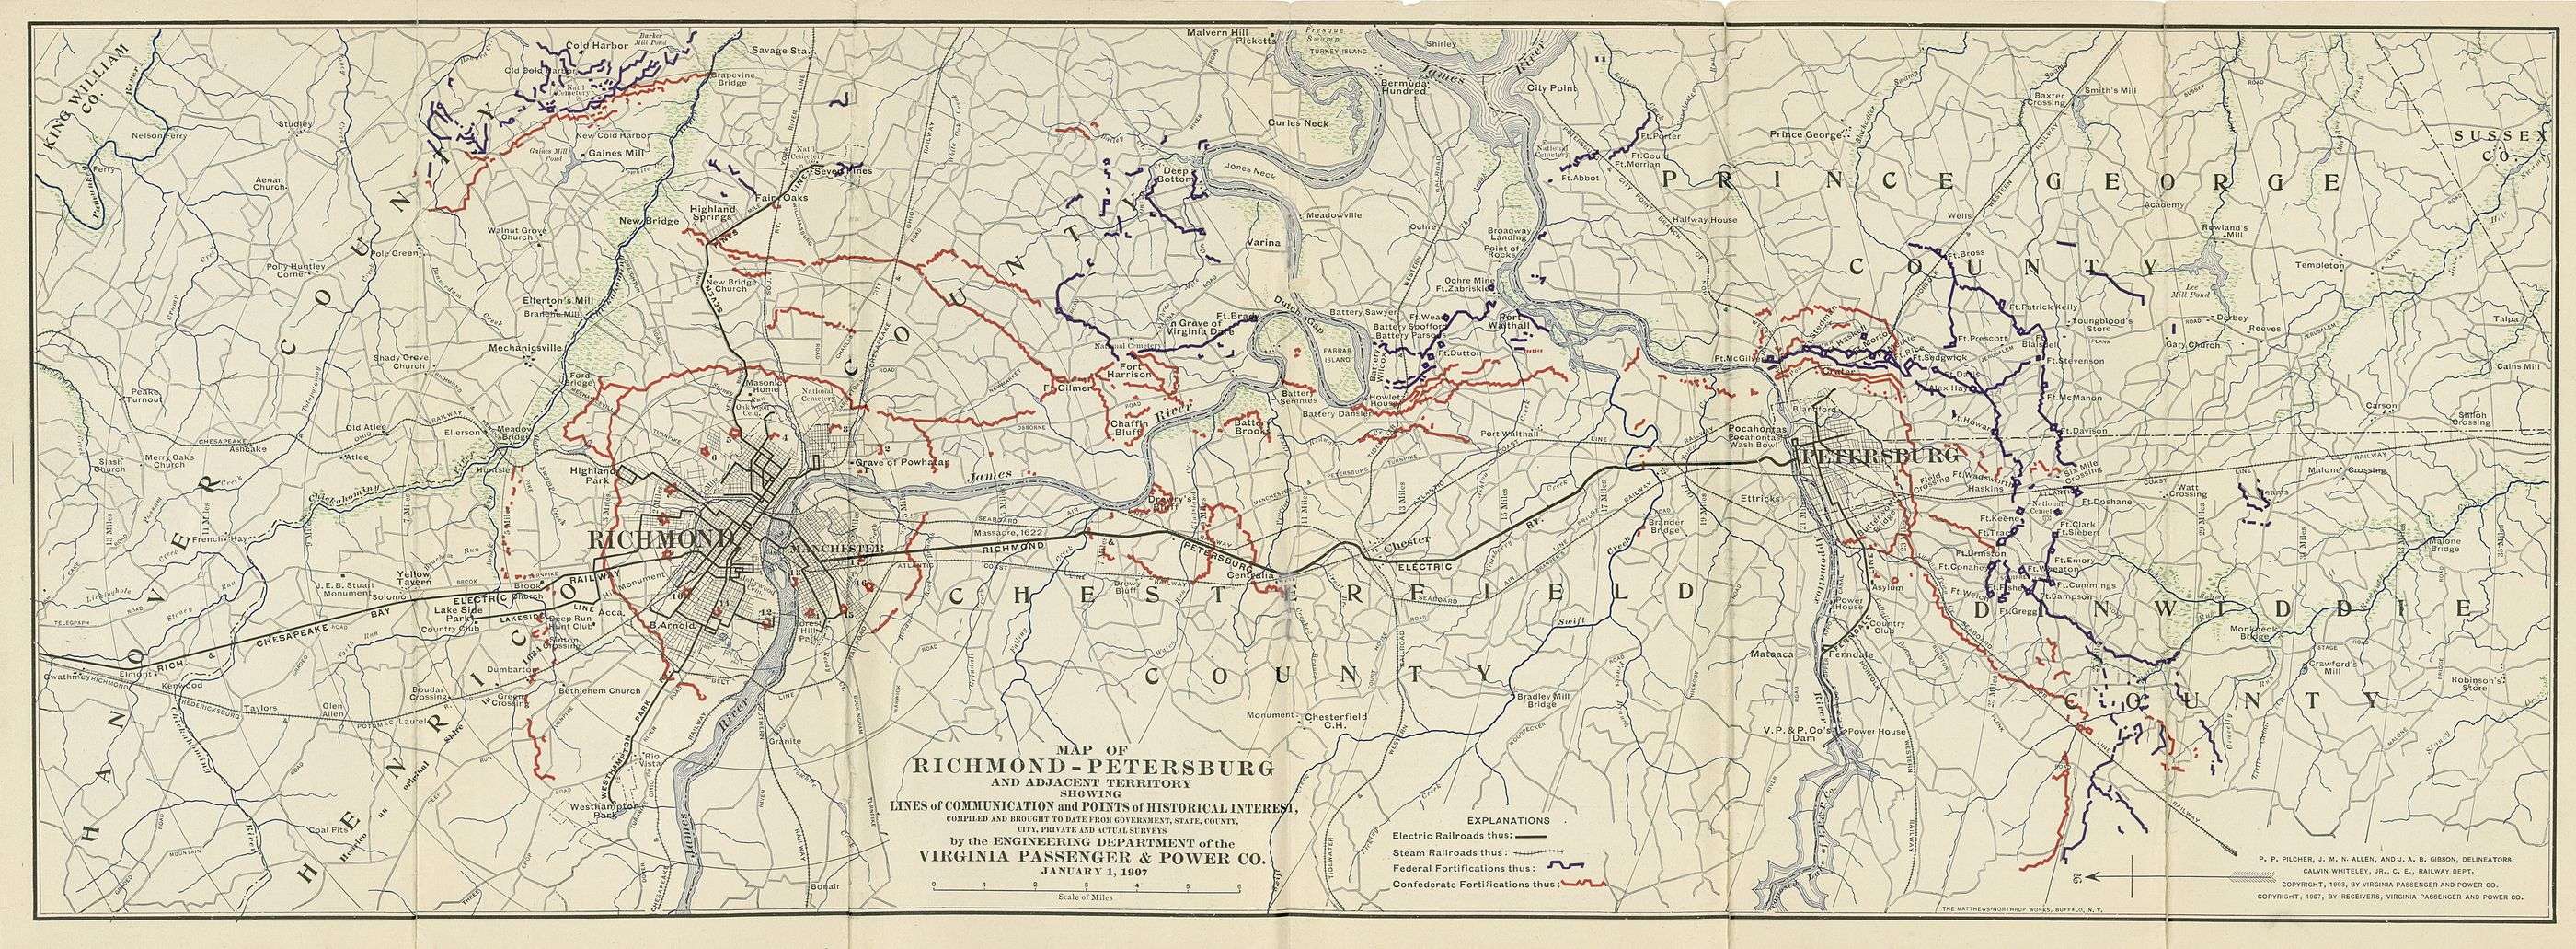 The Tidewater and Western is shown in Chesterfield County, Virginia in that shows the Tidewater and Western tracks across Chester to Bermuda Hundred.